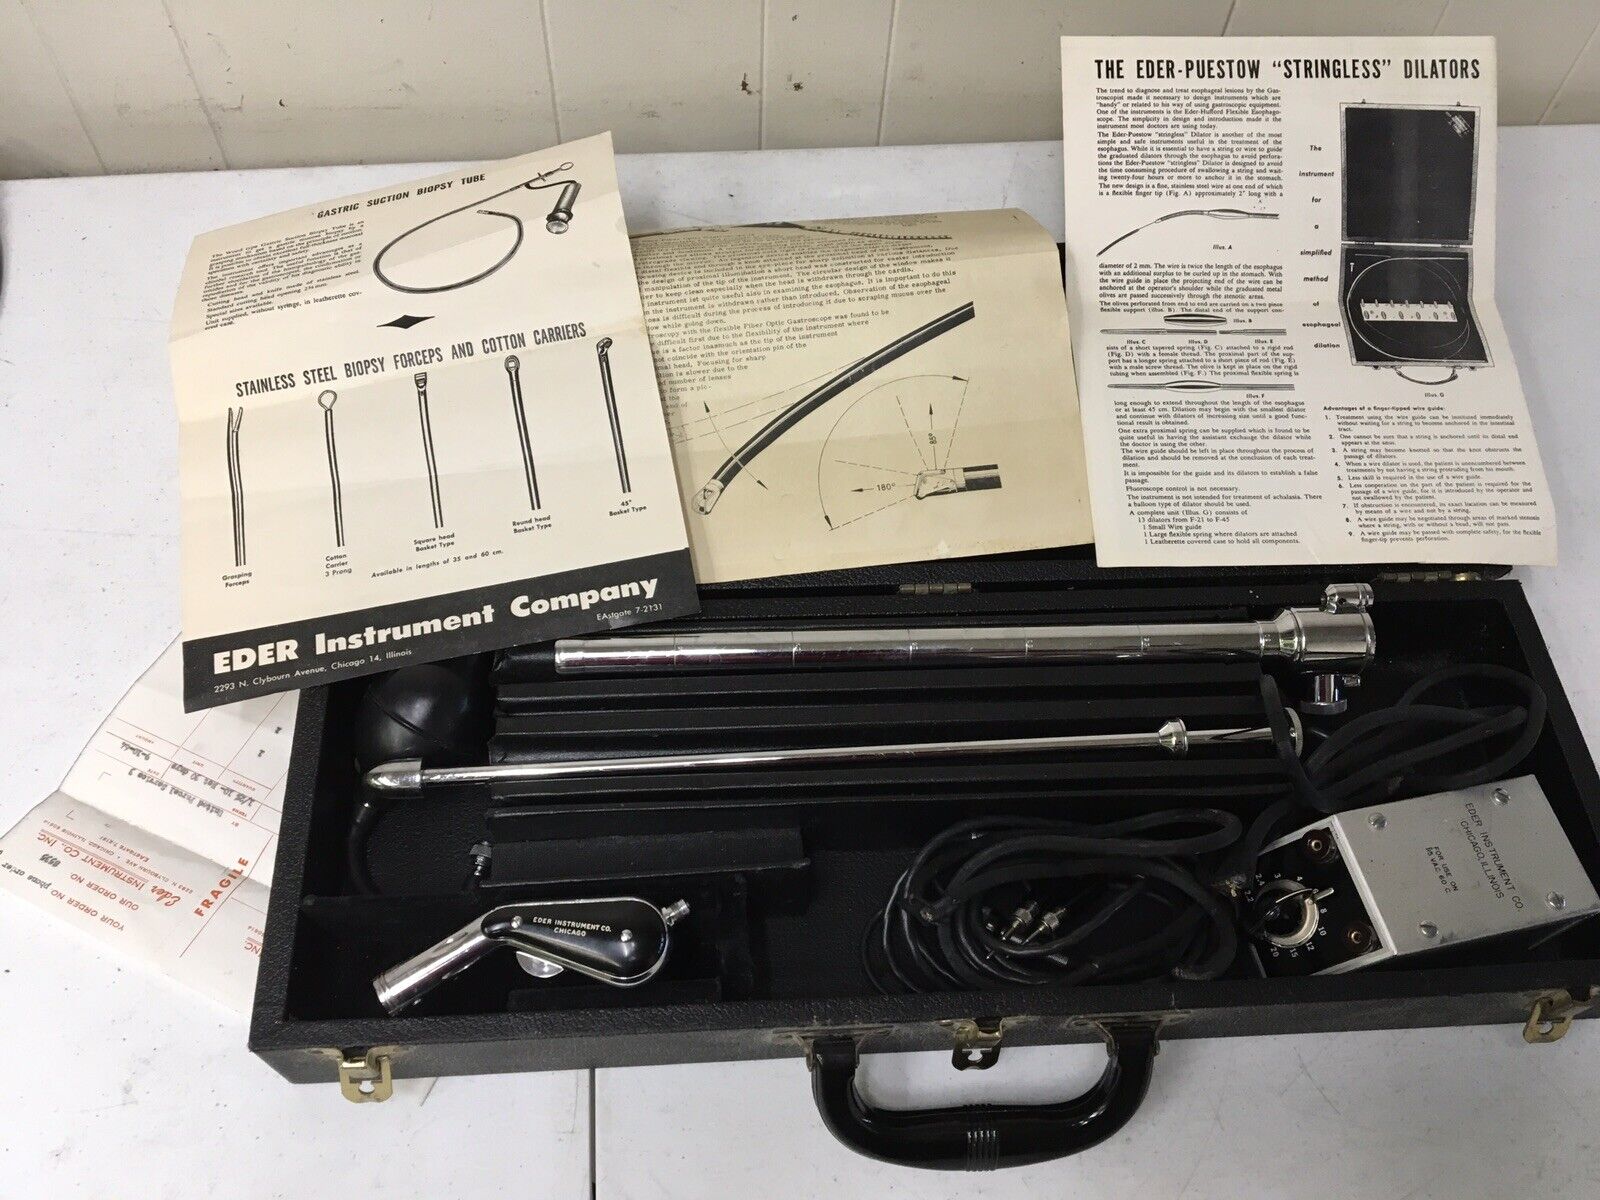 Vintage 1964 Eder-Hufford Esophagoscope kit with carrying case